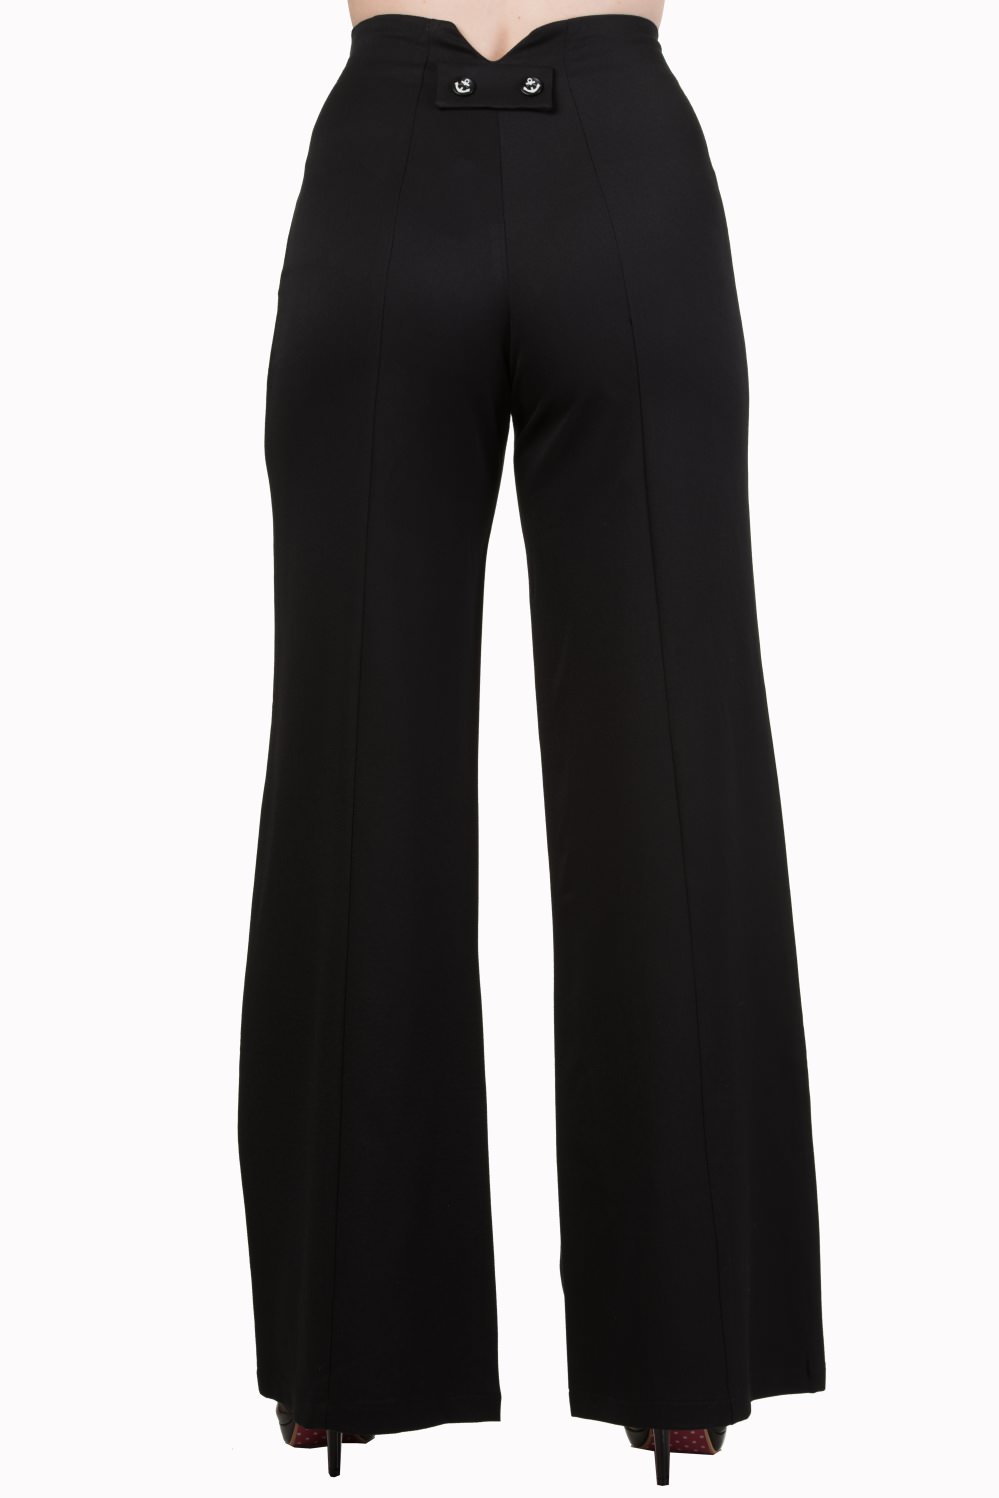 Dancing Days by Banned 40s Stay Awhile Black Trousers | Plus Sizes